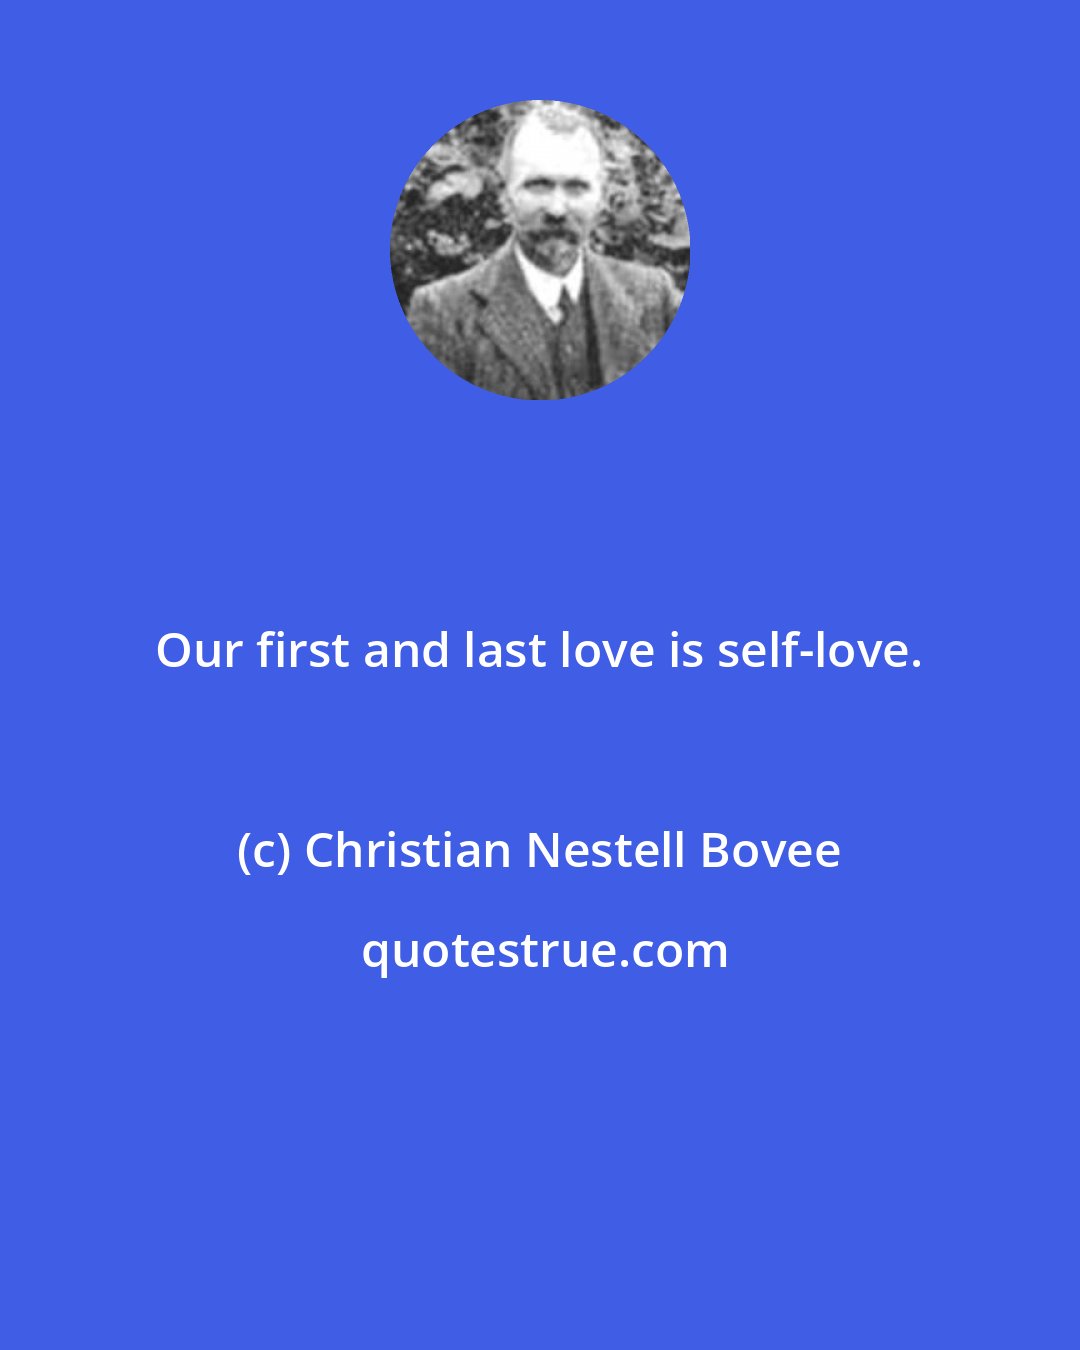 Christian Nestell Bovee: Our first and last love is self-love.